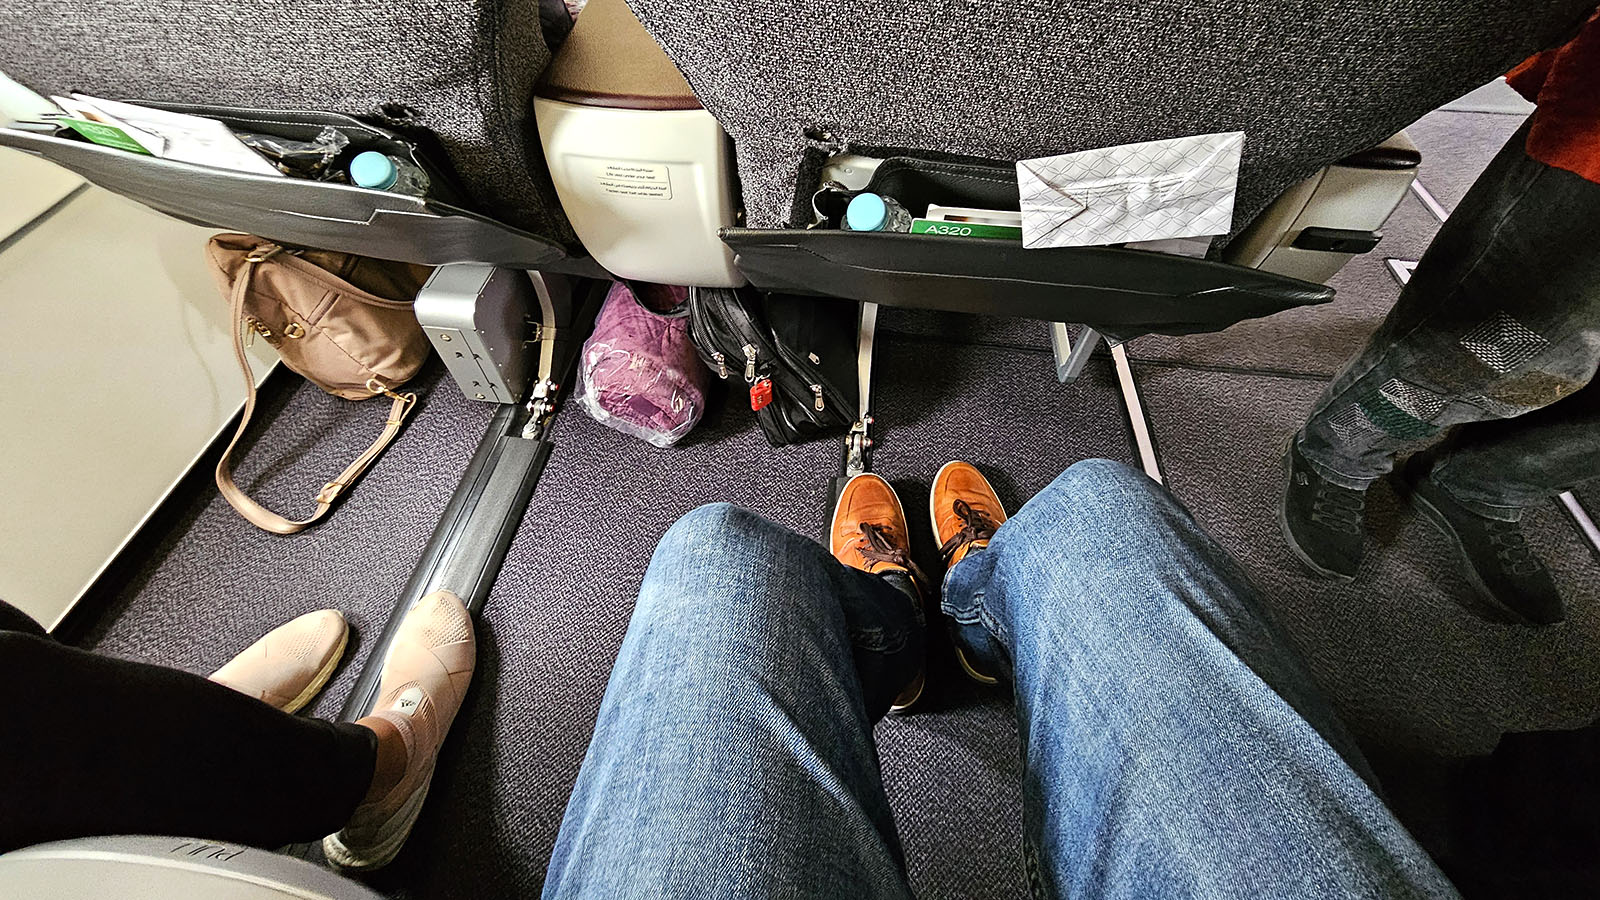 Space in Business / First Class on Qatar Airways' Airbus A320